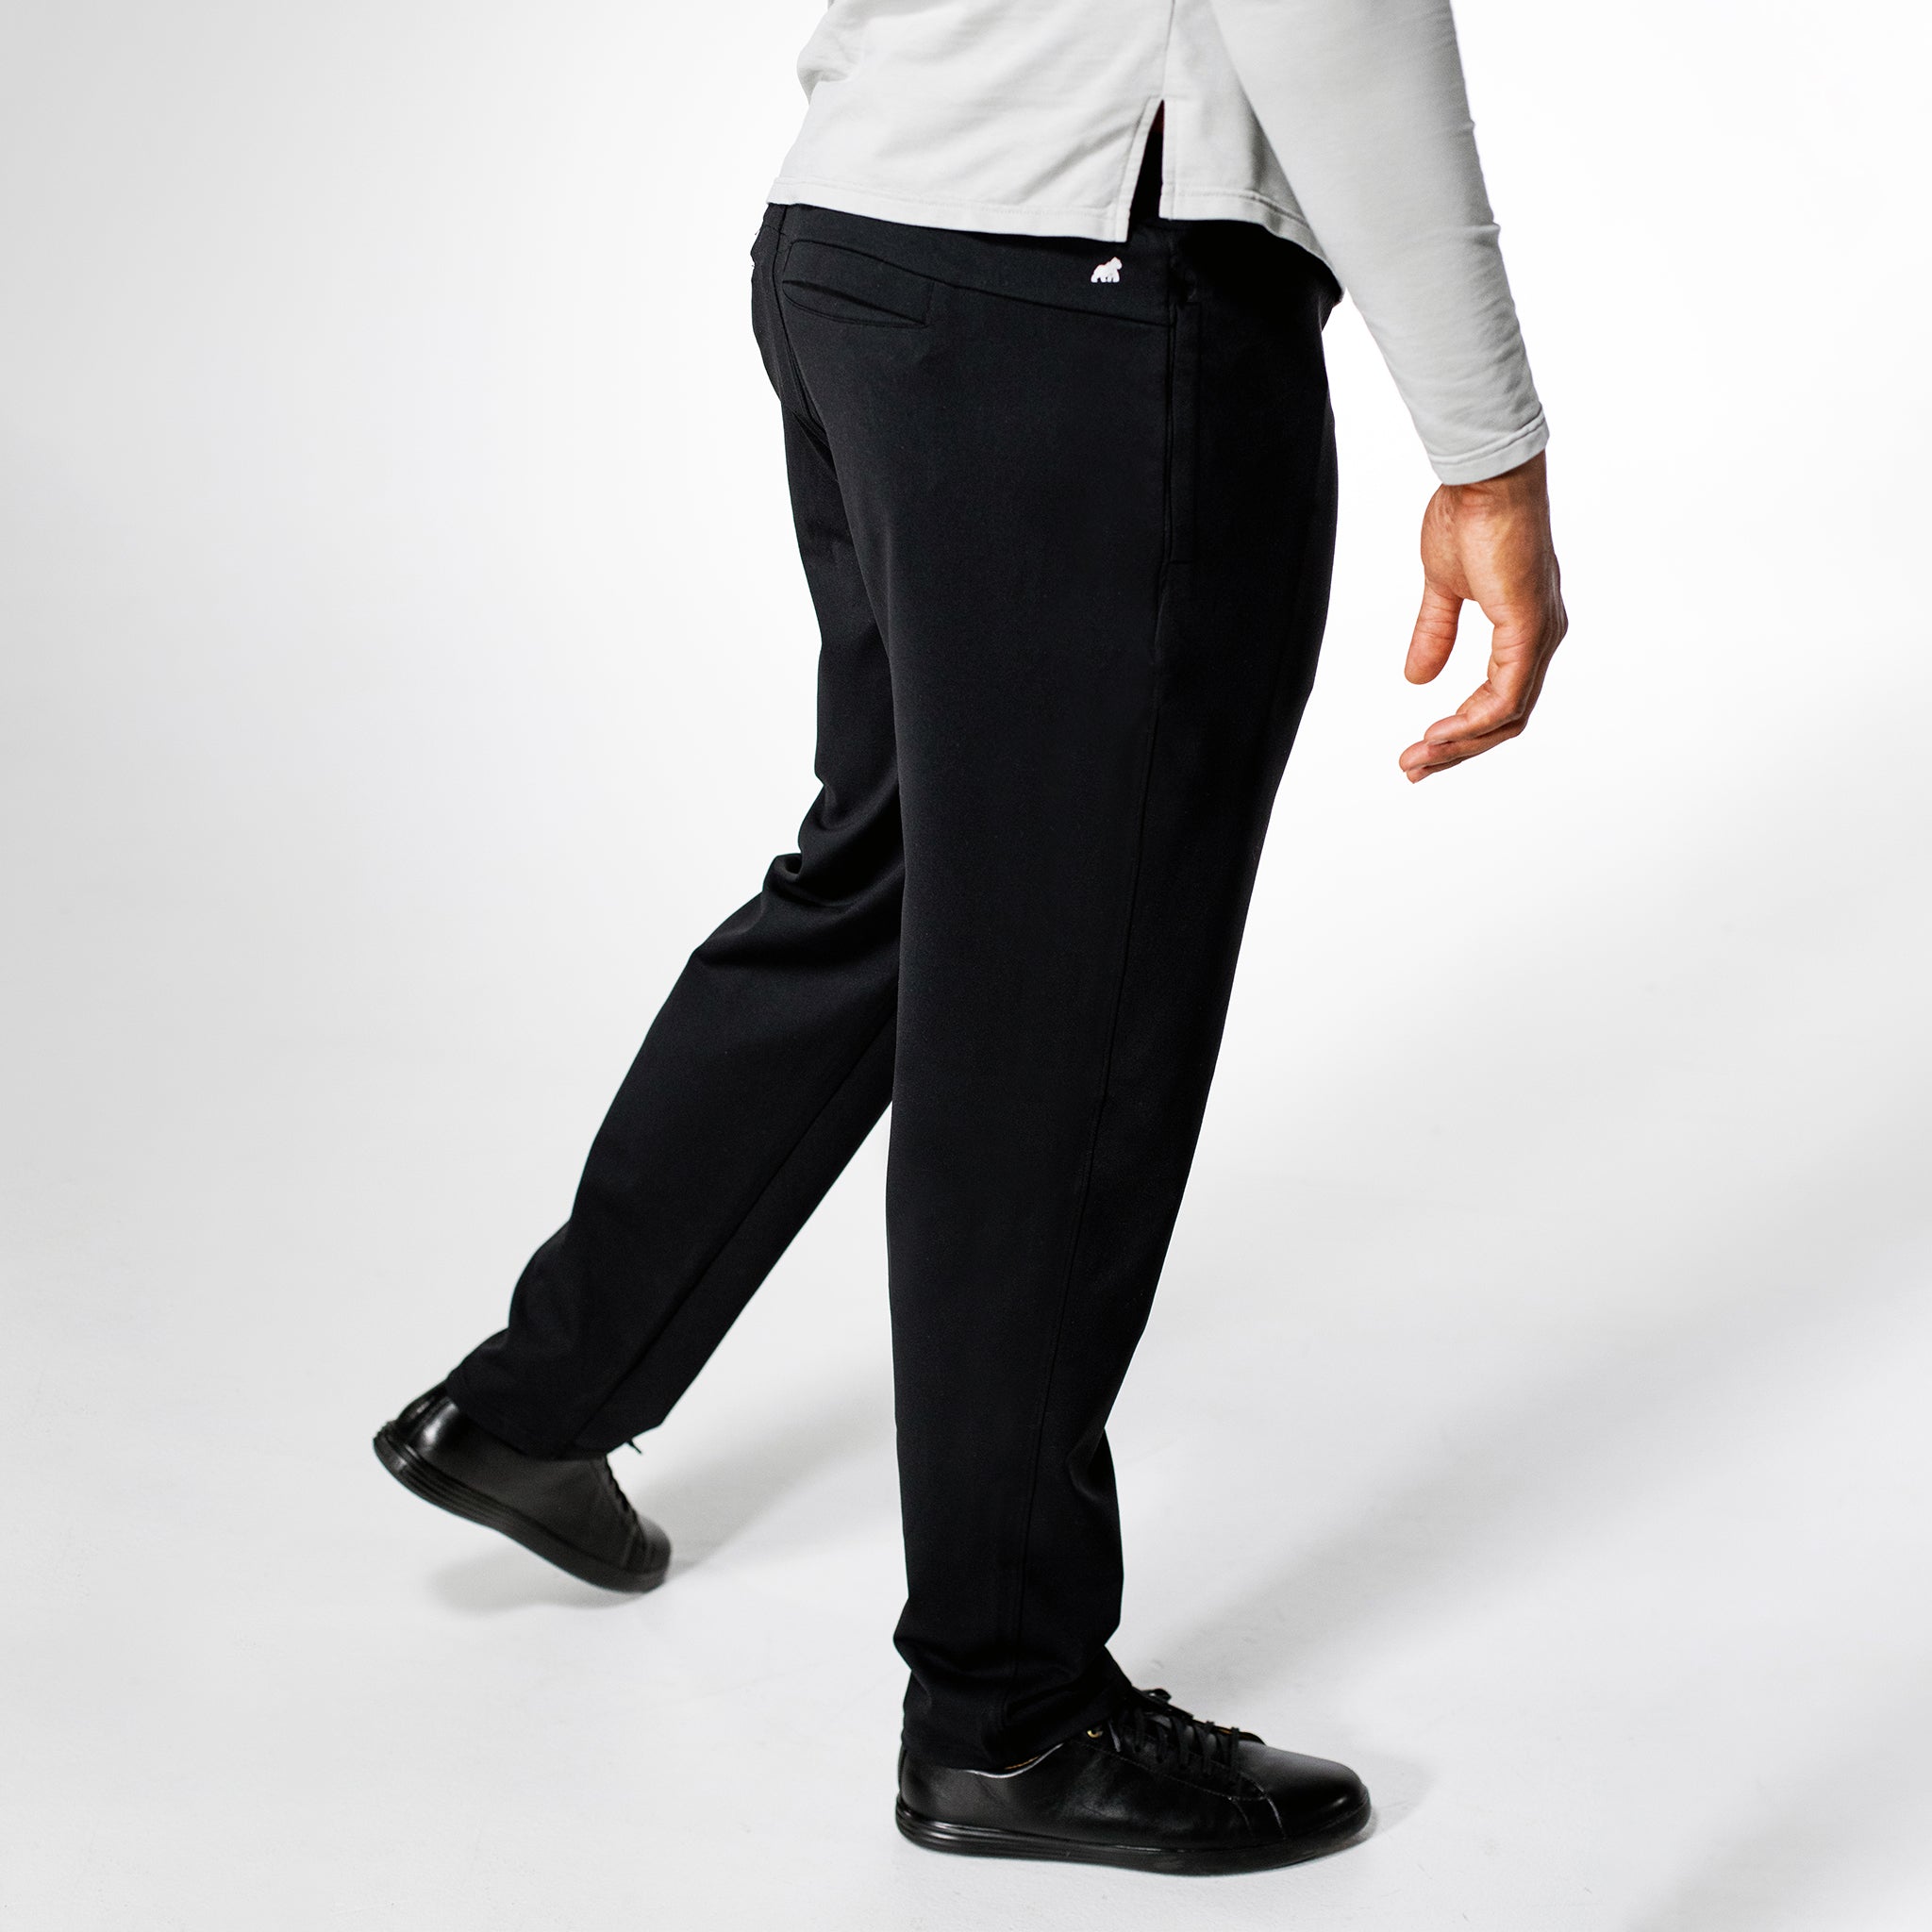 All Day, Everyday Super - Stretch Men's Pants - Black